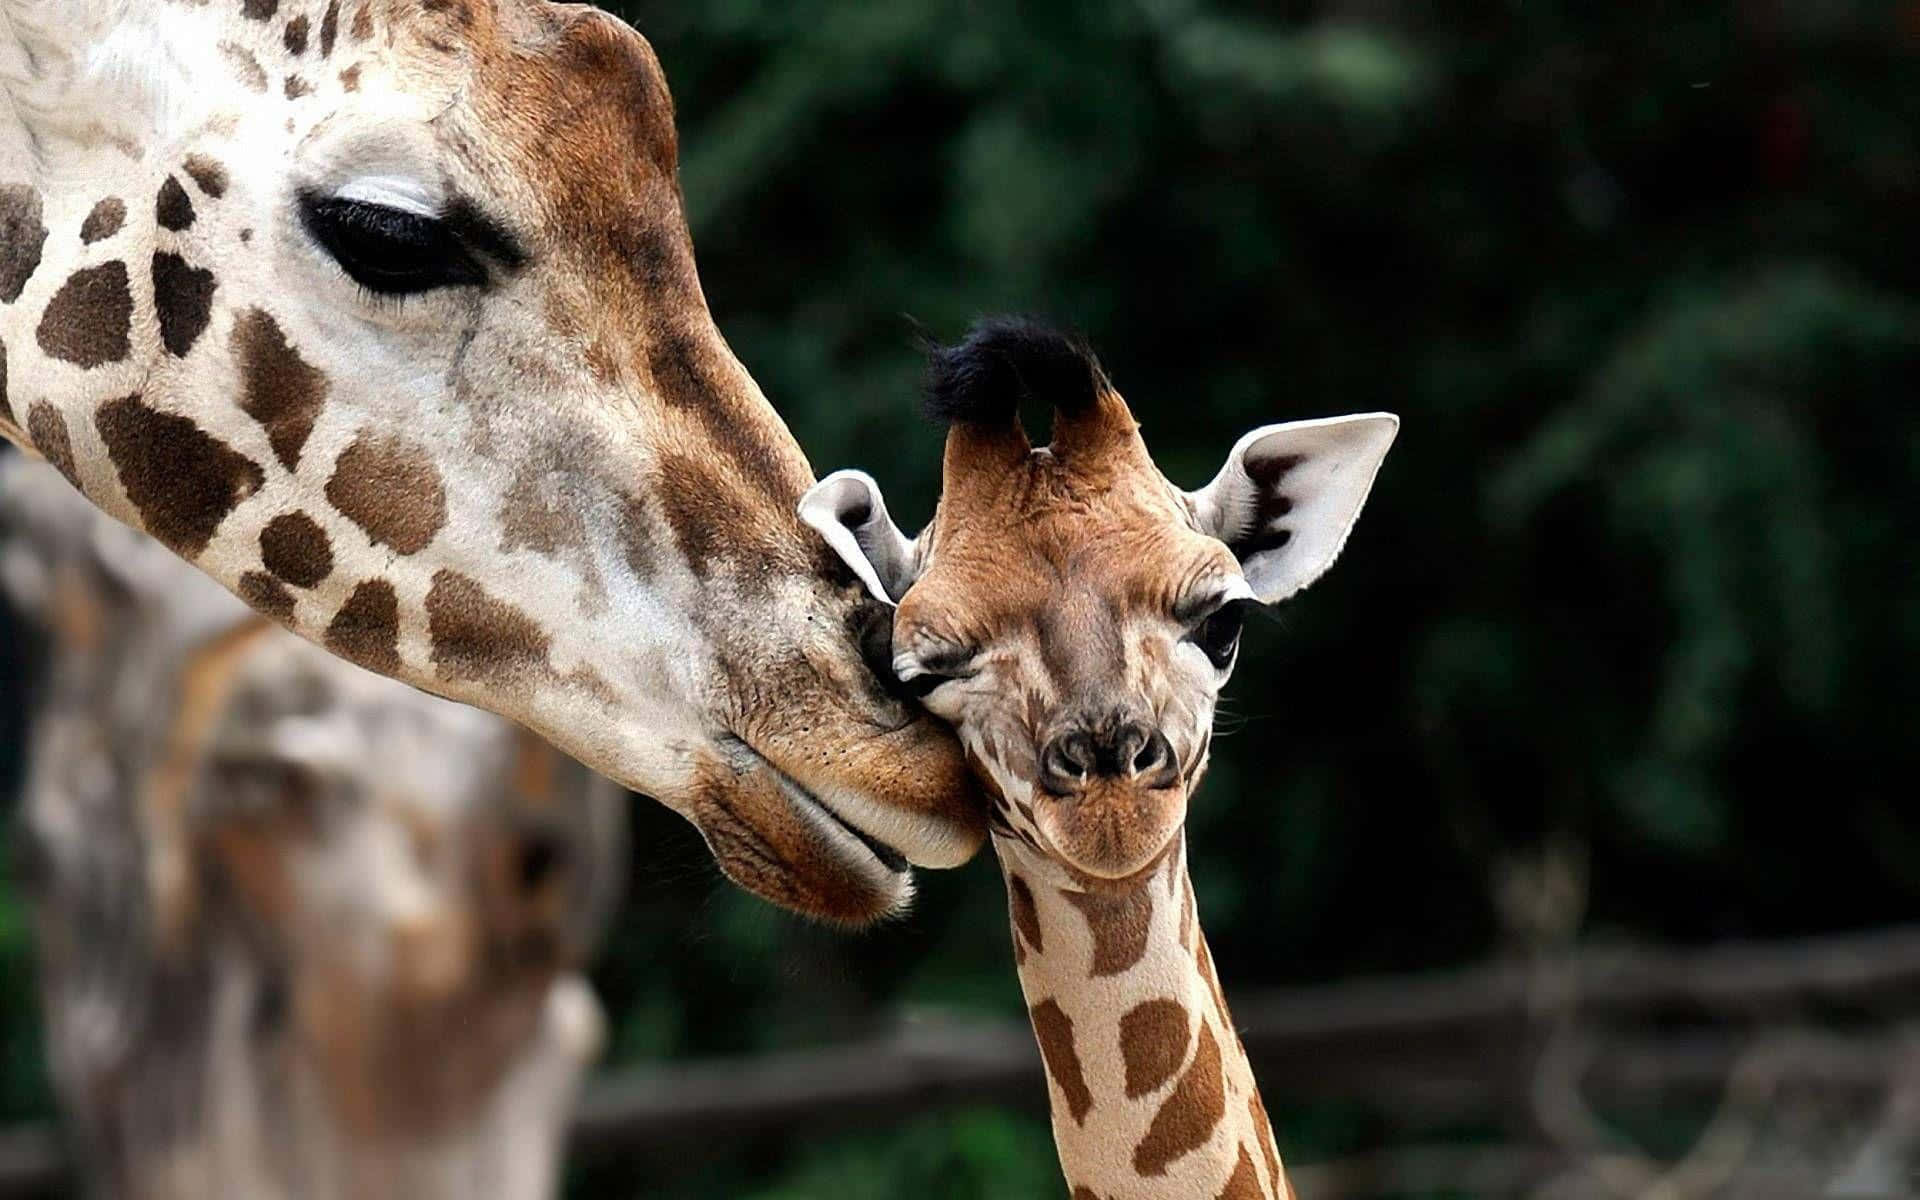 Get Up Close and Personal with a Baby Giraffe